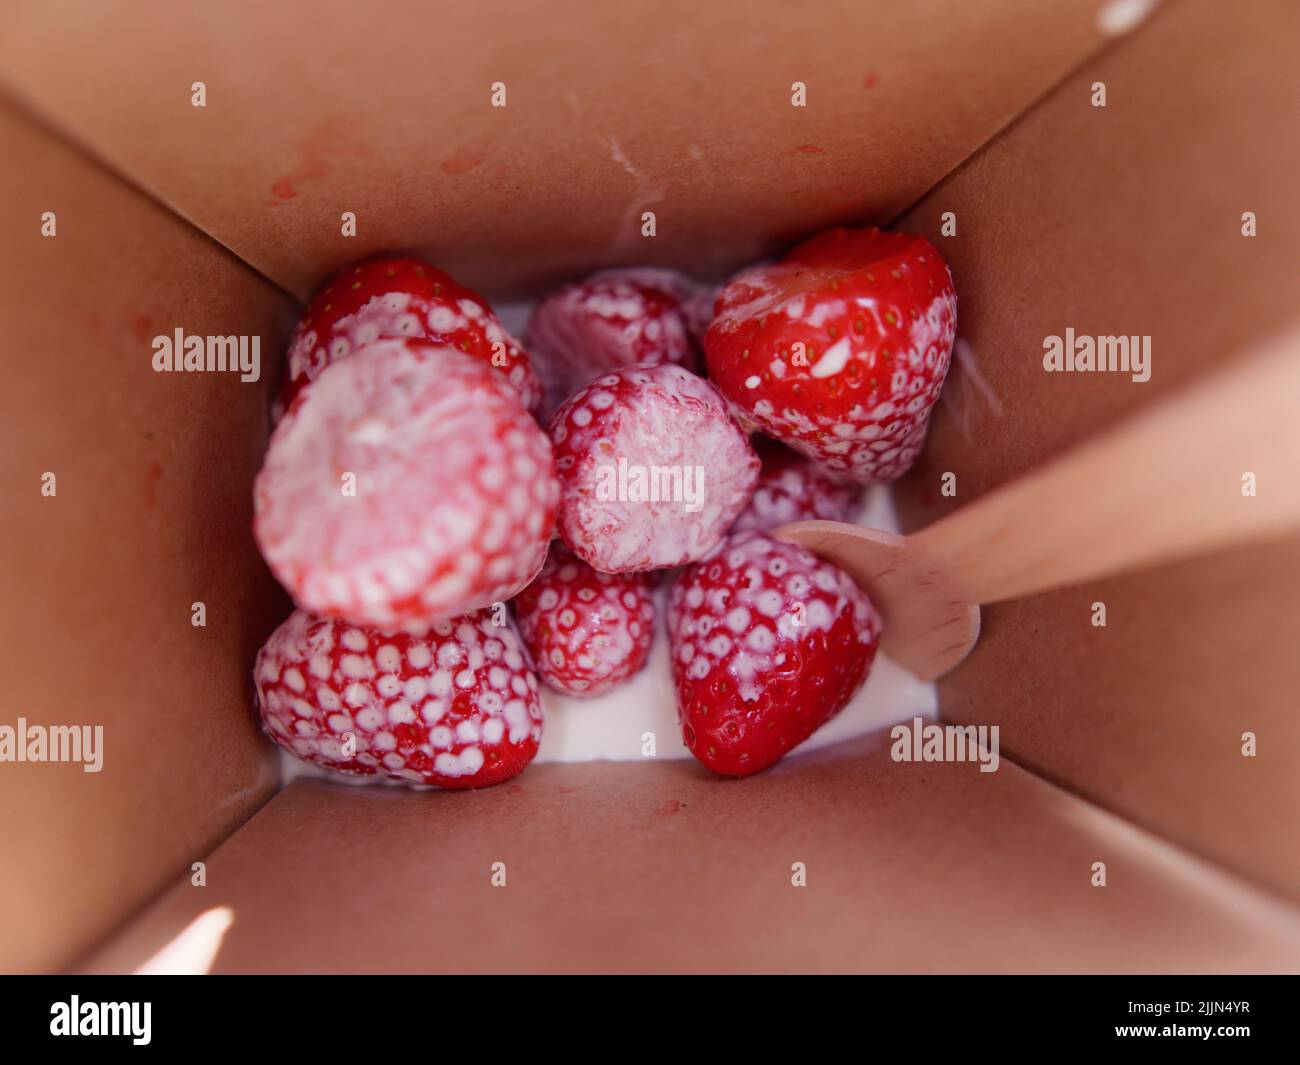 Strawberries and cream with a wooden spoon Stock Photo